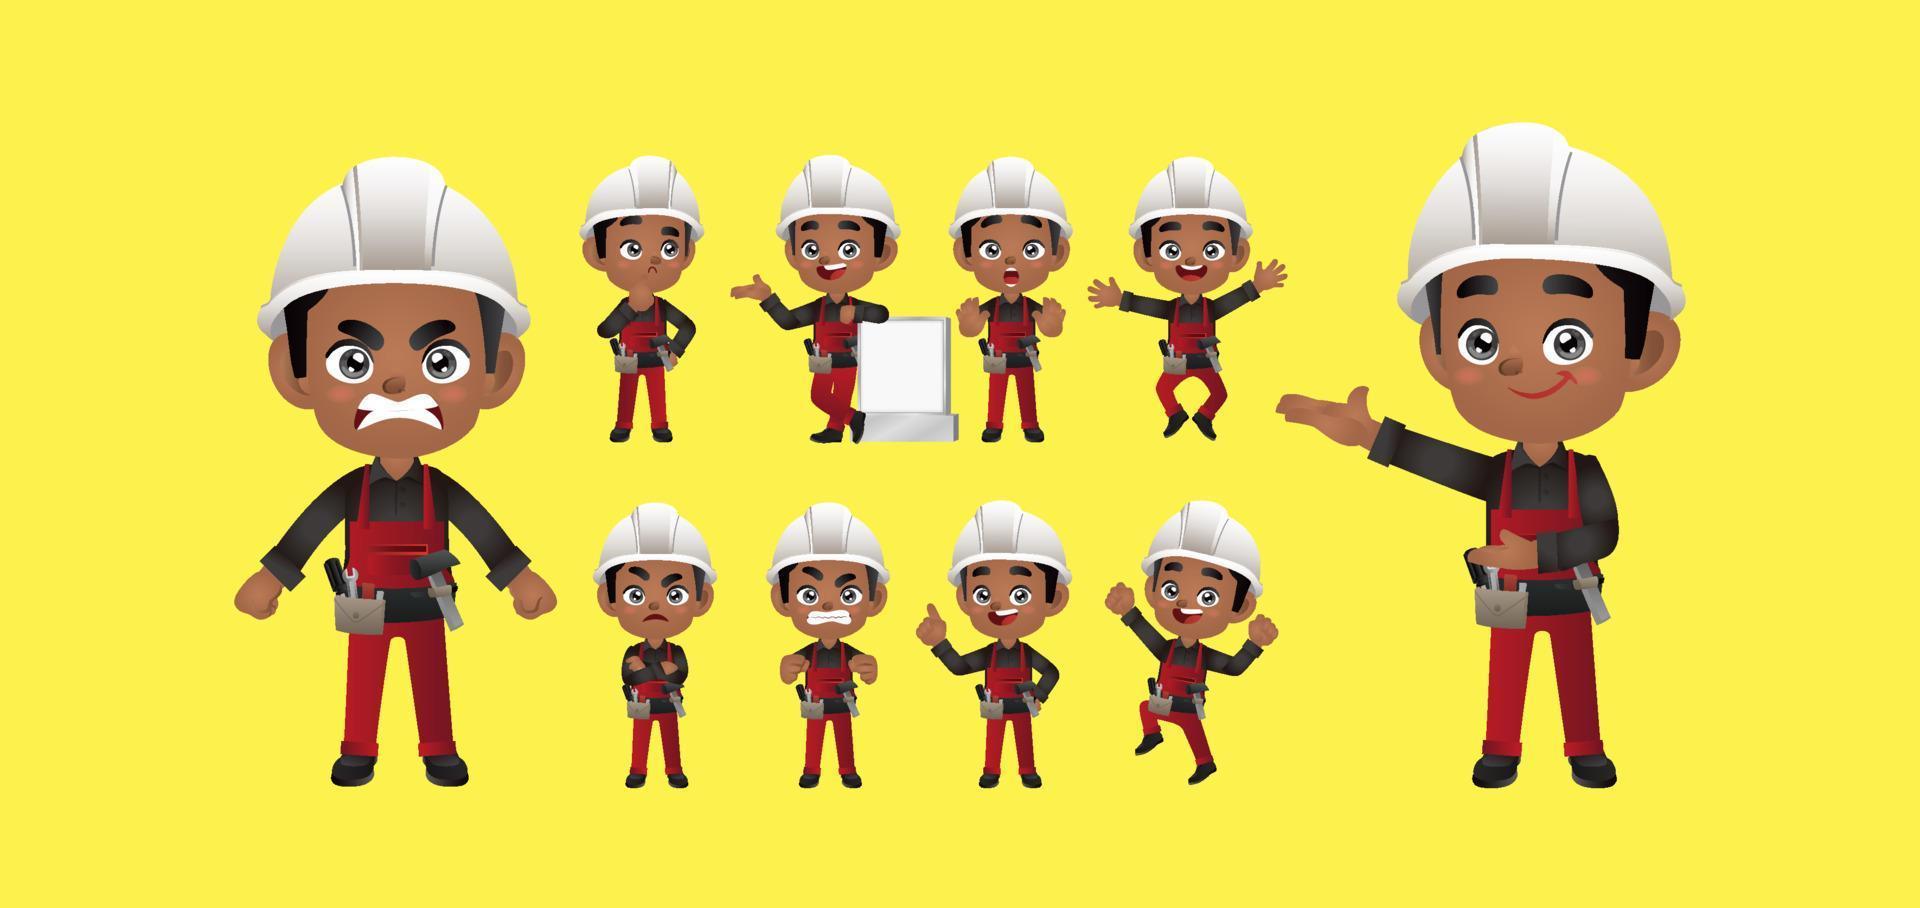 Worker set. Different poses and gestures vector